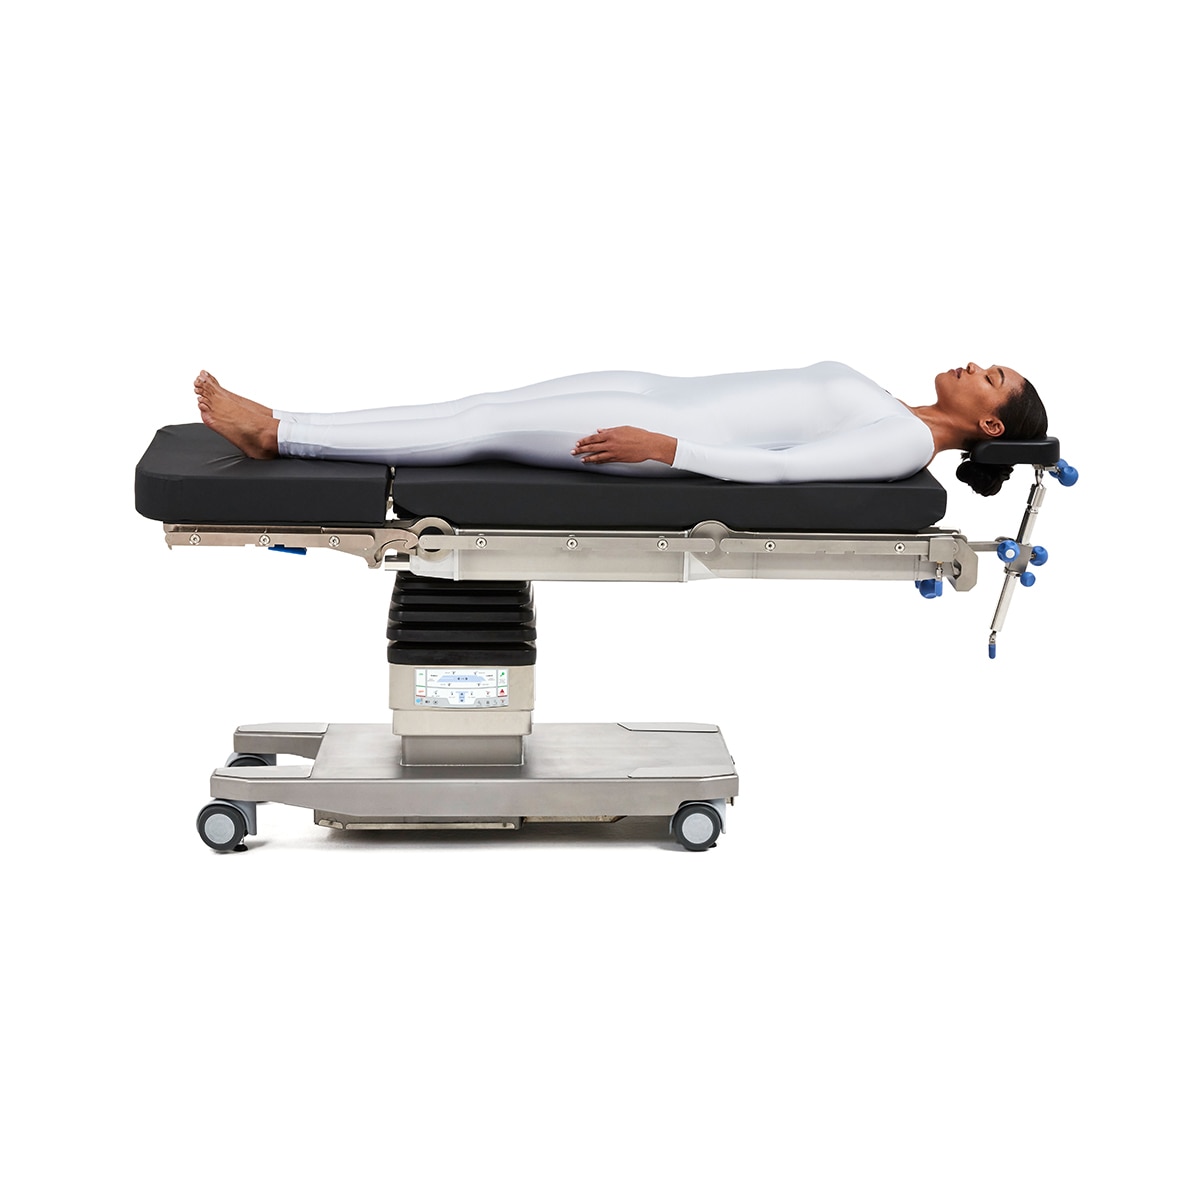 Patient positioned with Hillrom ENT or ophthalmic headrest.